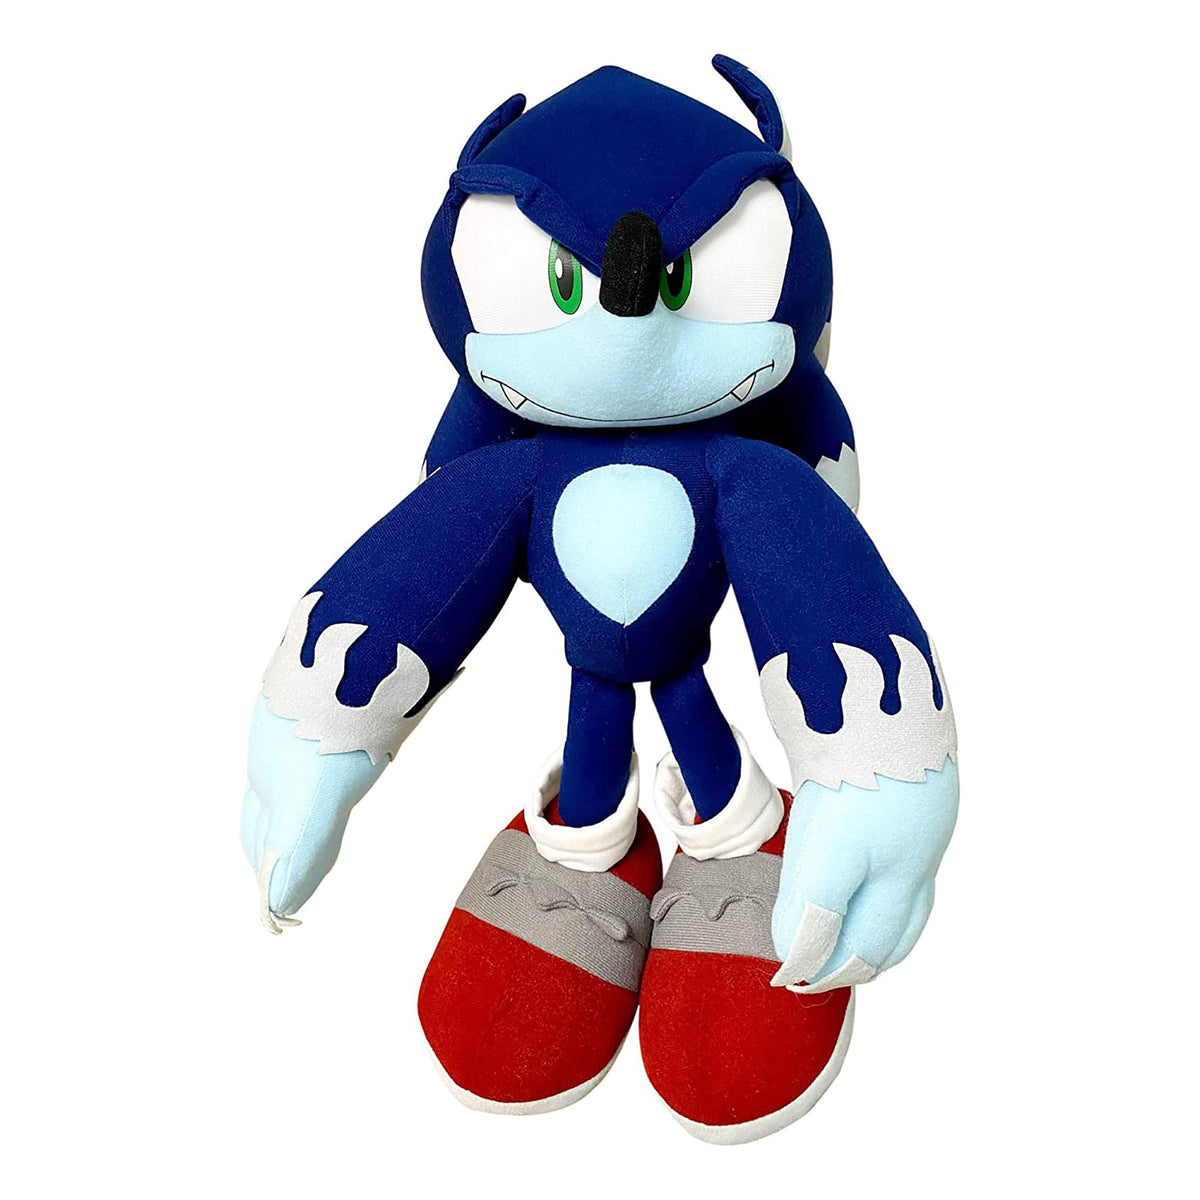 Dog Toys (Pack of 3) – SONIC Swag